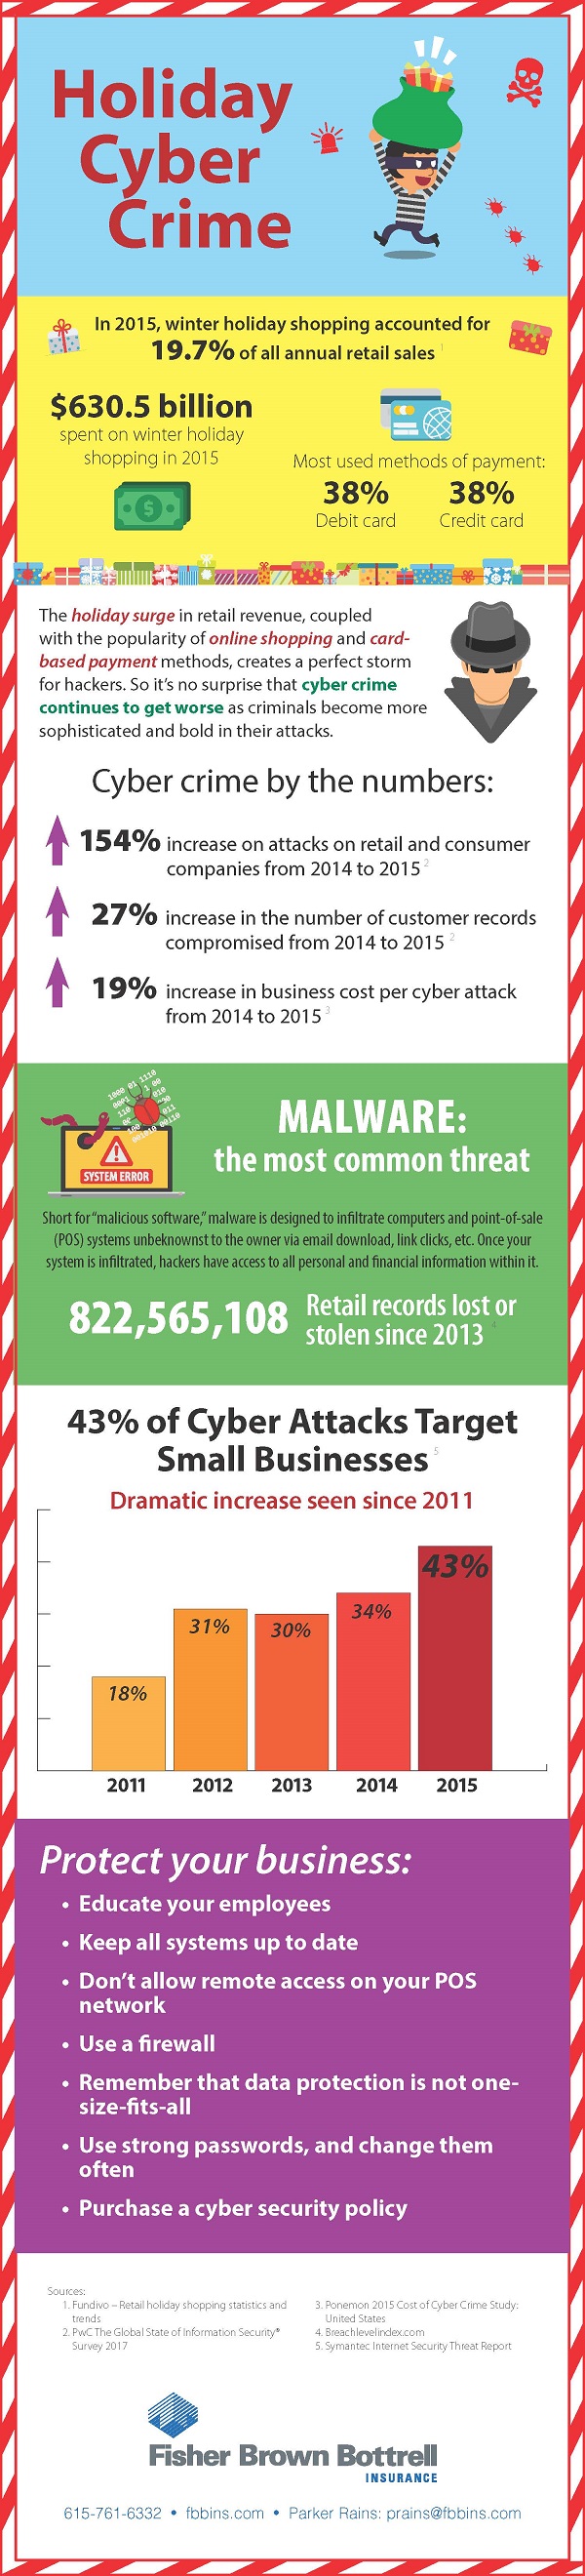 holiday-cyber-crime-infographic